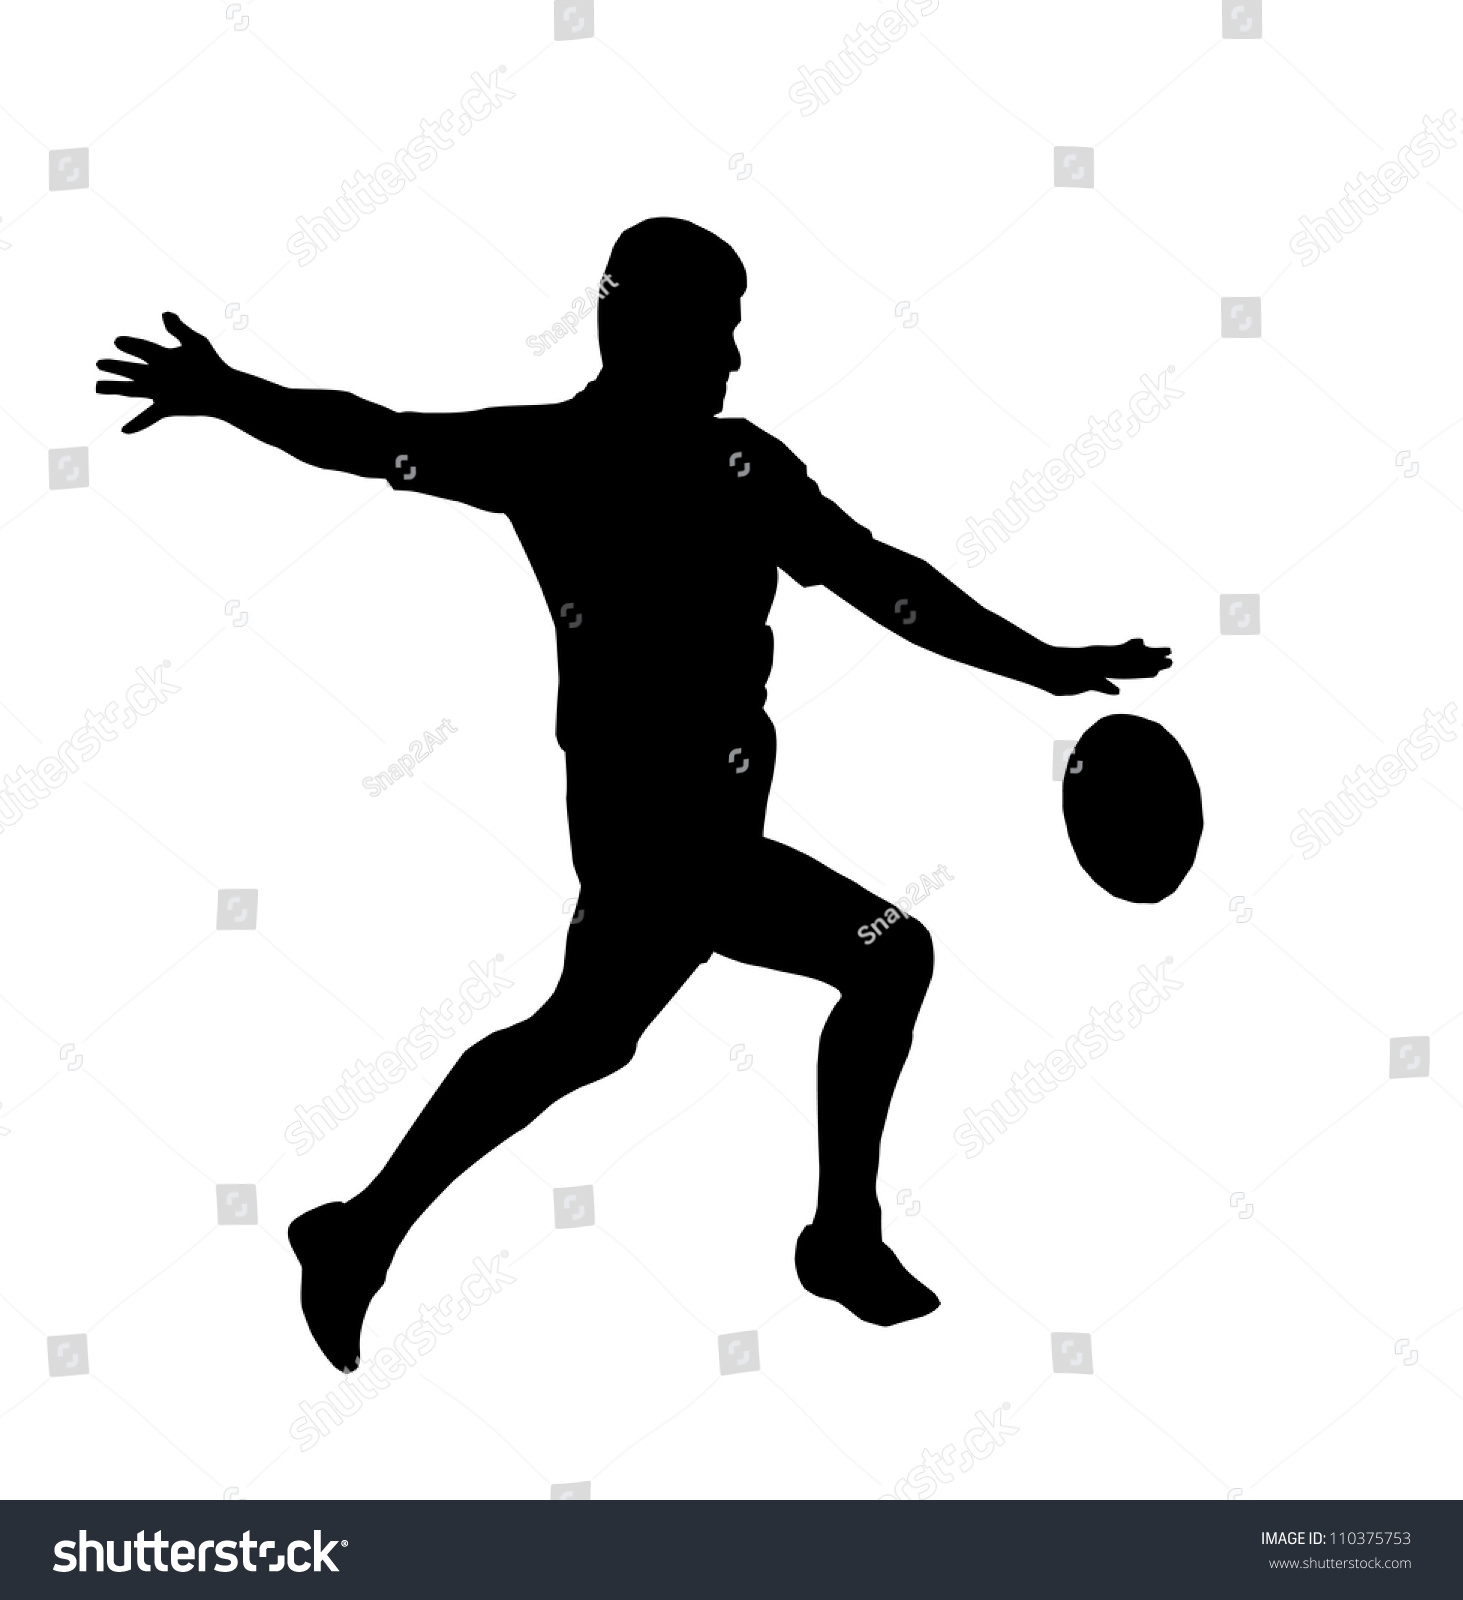 Sport Silhouette - Rugby Football Player Maring Running ...